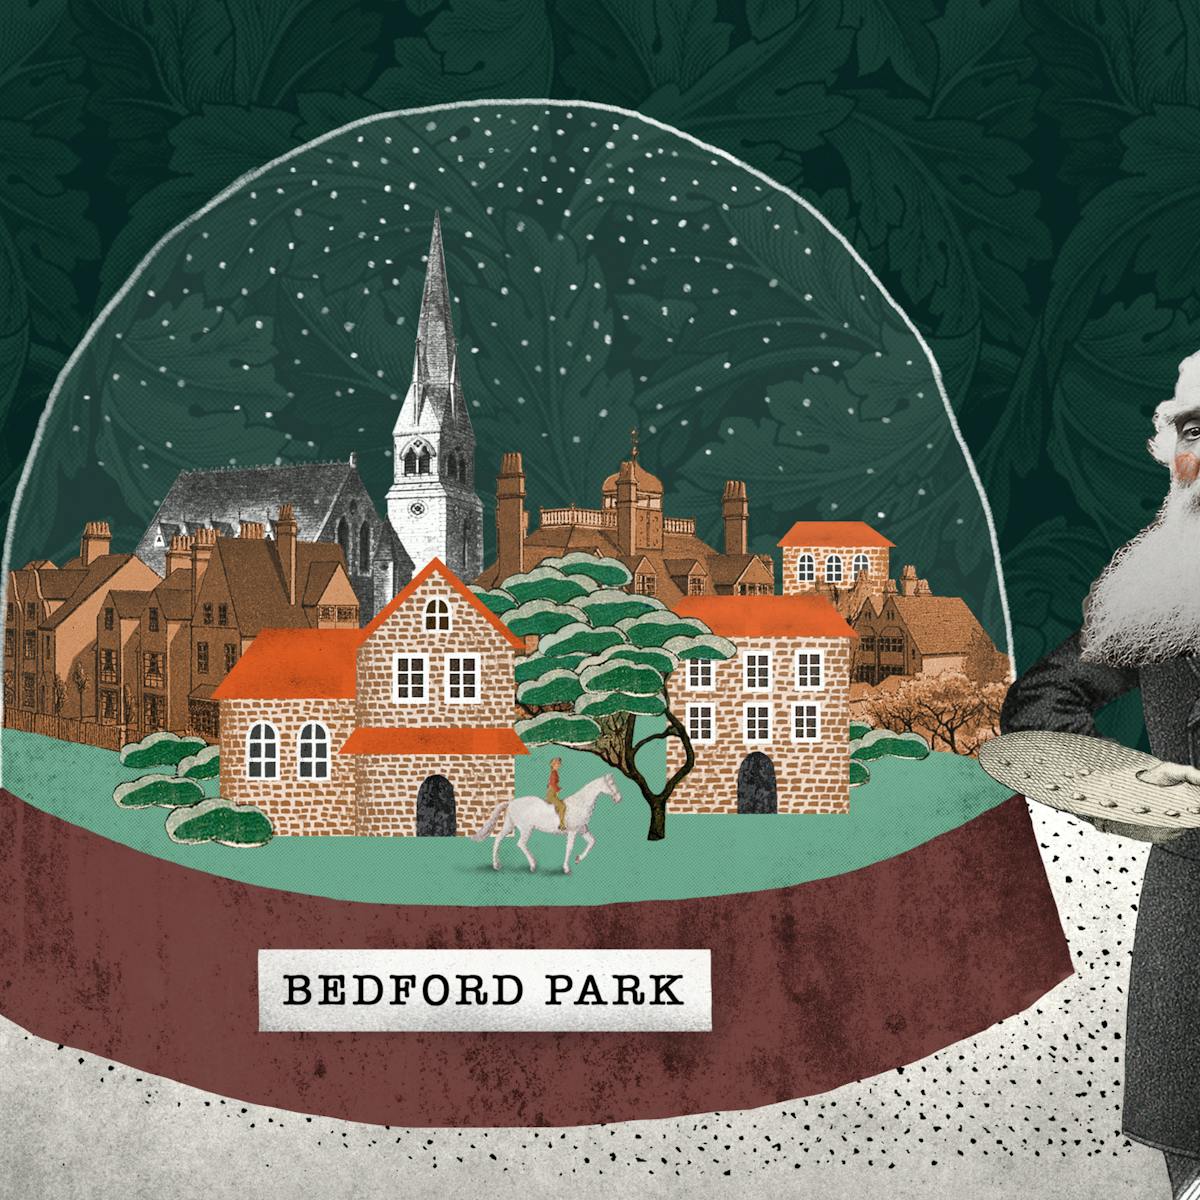 Artist's montage showing the garden suburb of Bedford Park within a snowglobe, with historical figures looking on